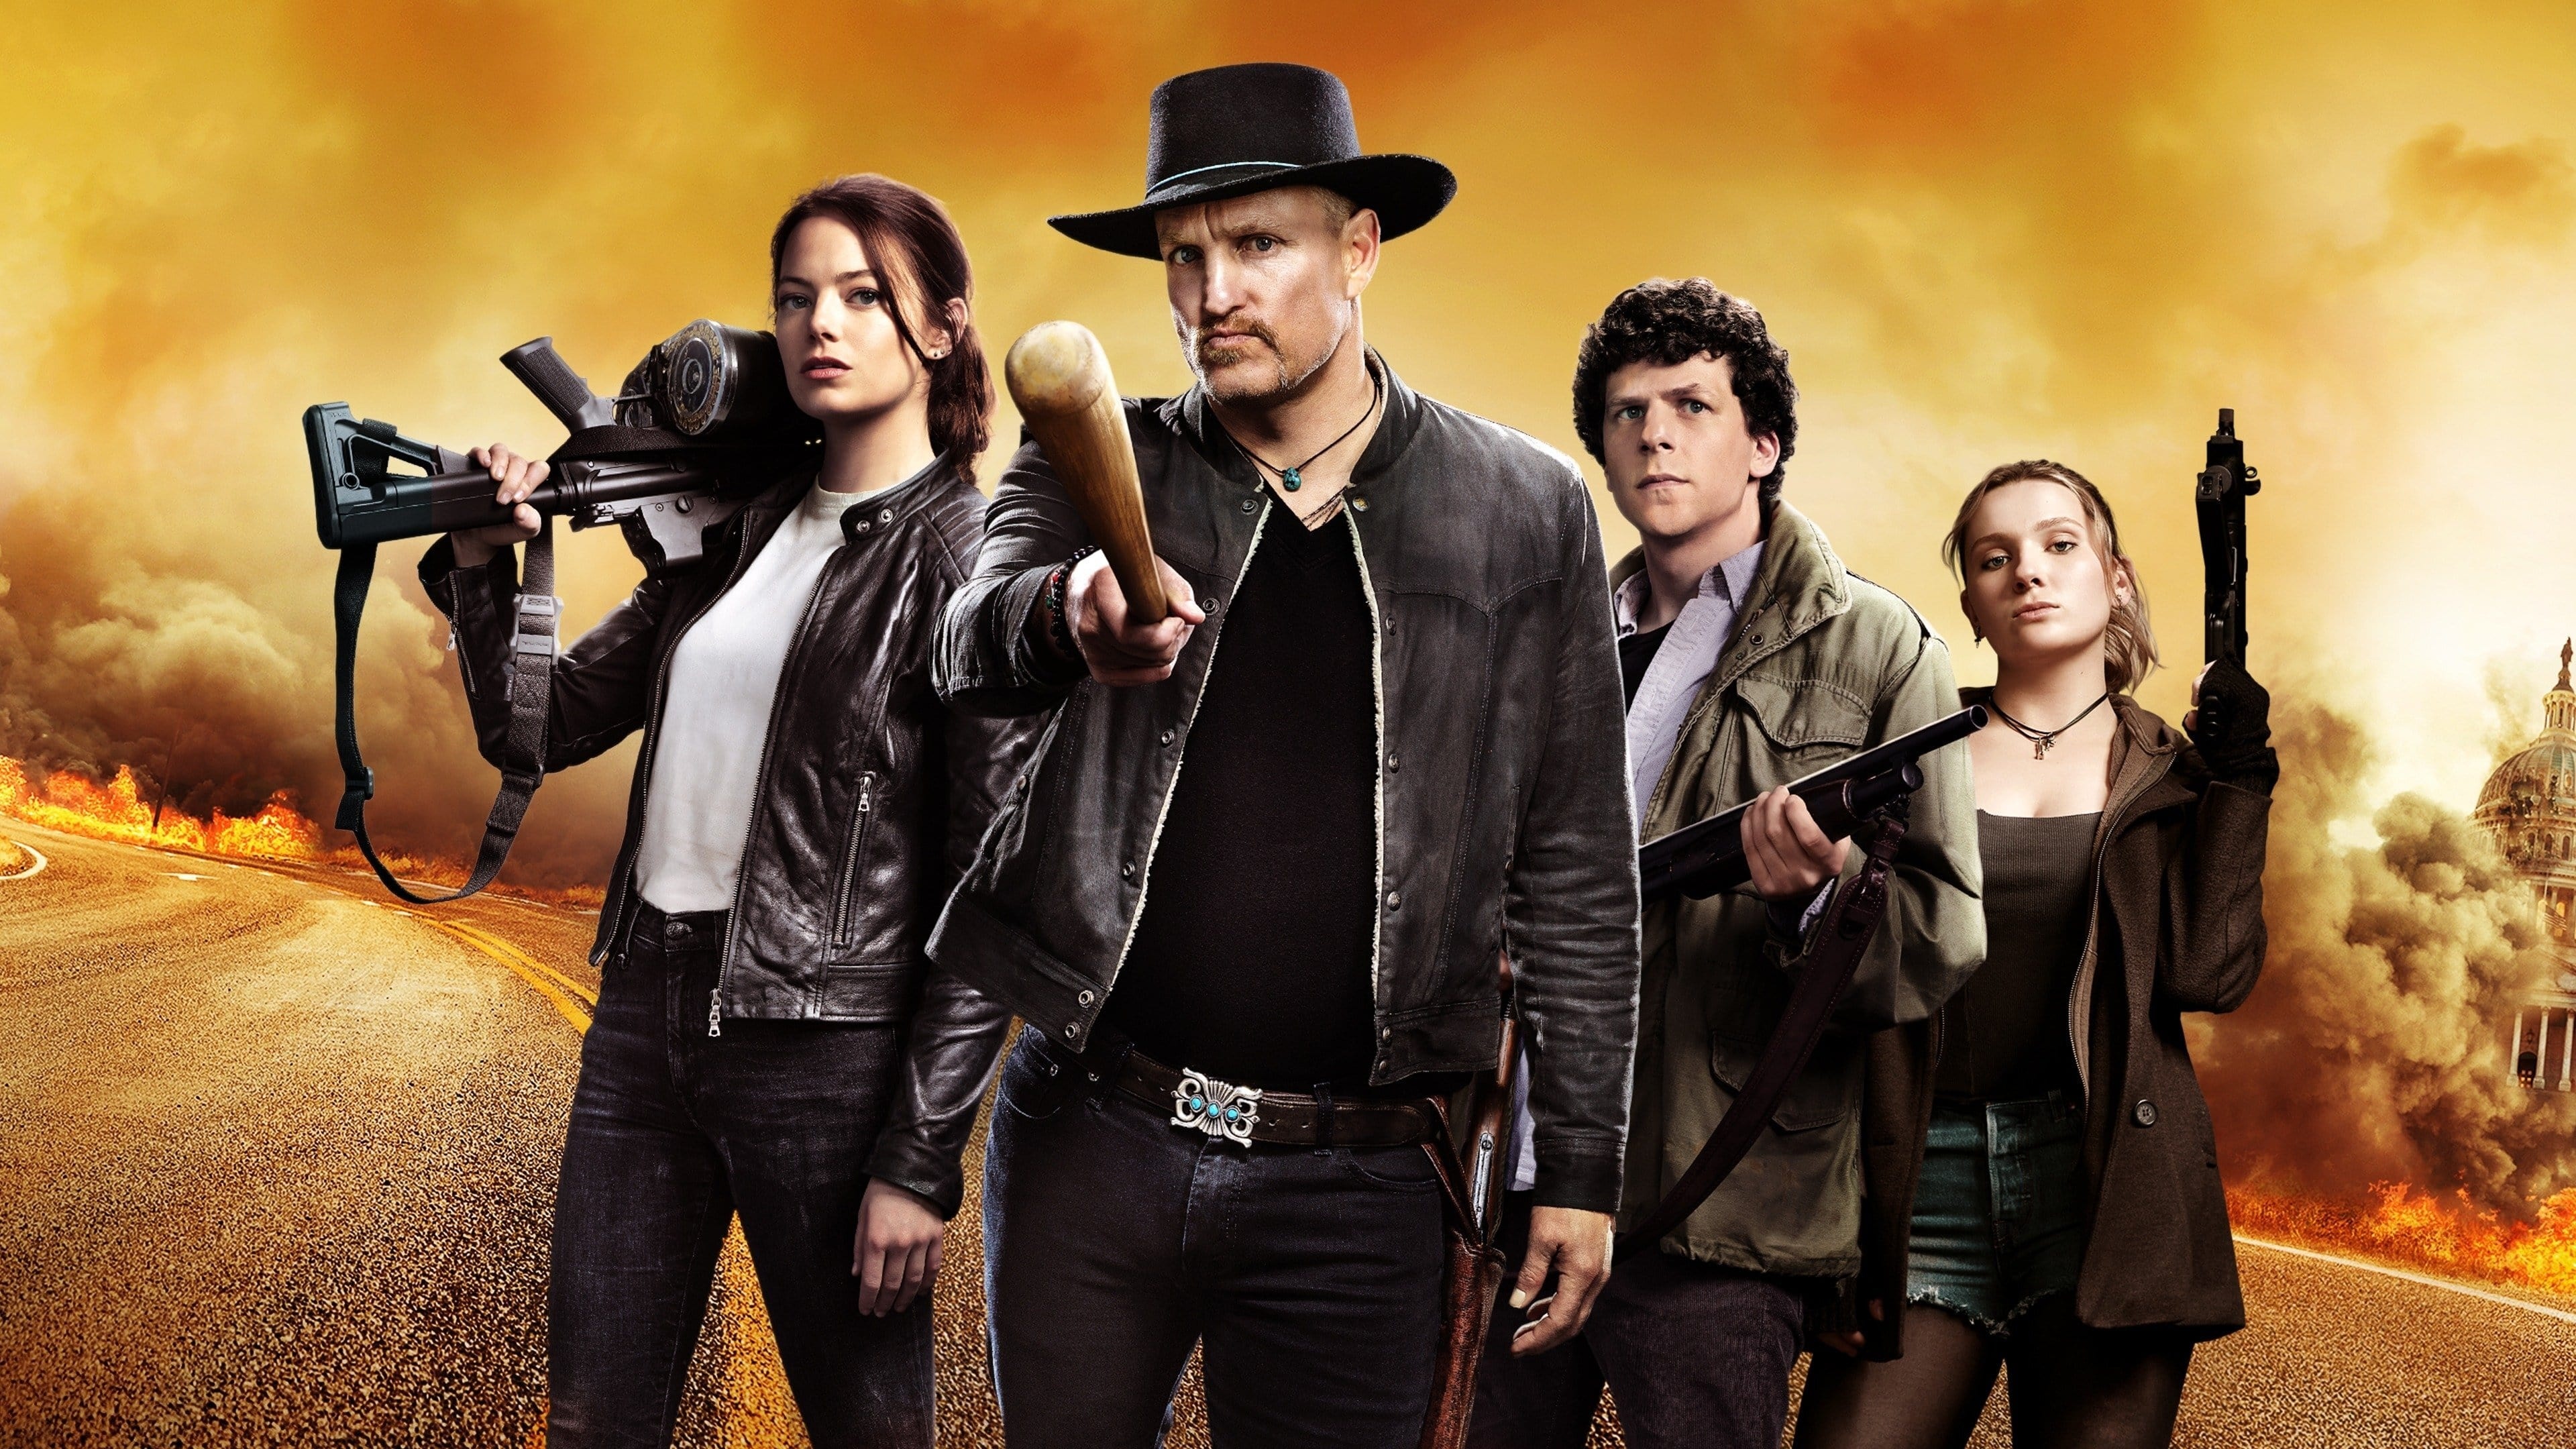 Zombieland: Double Tap, a 2019 American post-apocalyptic zombie comedy film. 3840x2160 4K Wallpaper.